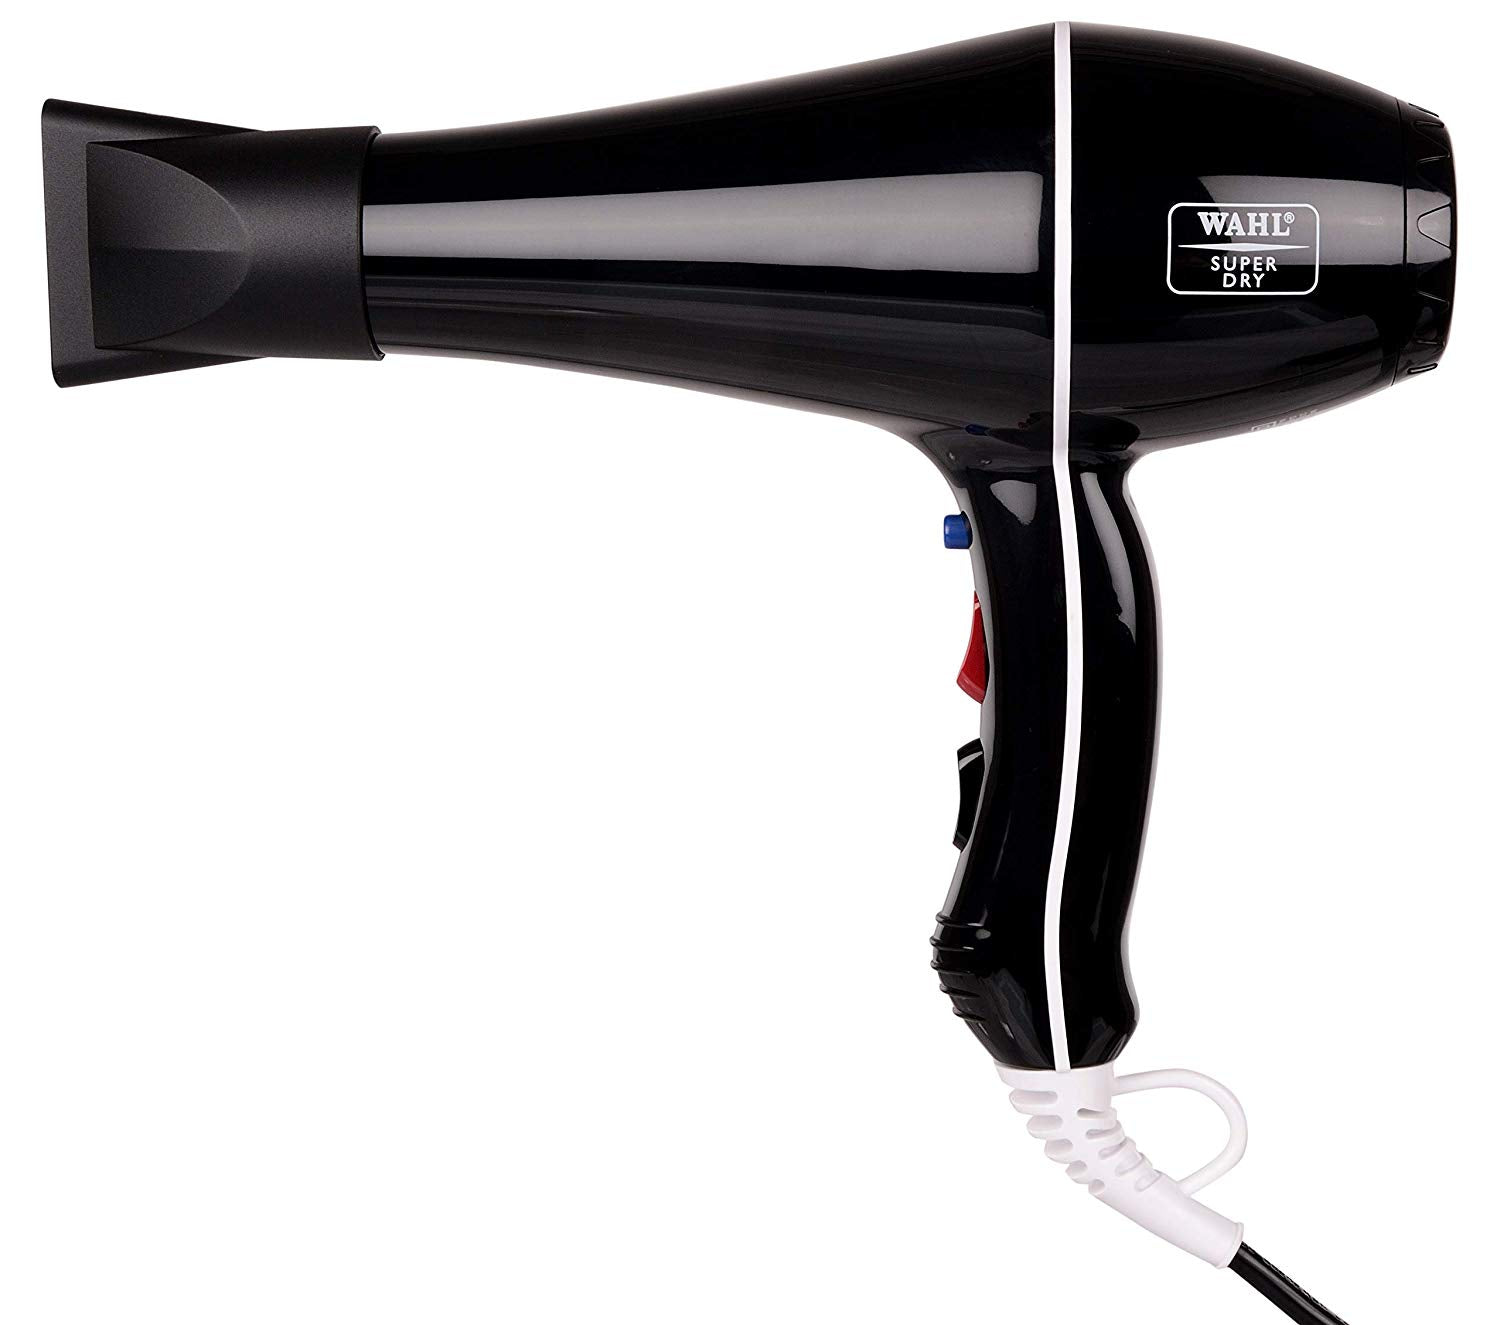 Wahl Super Dry Professional Styling Hair Dryer (5439-024)